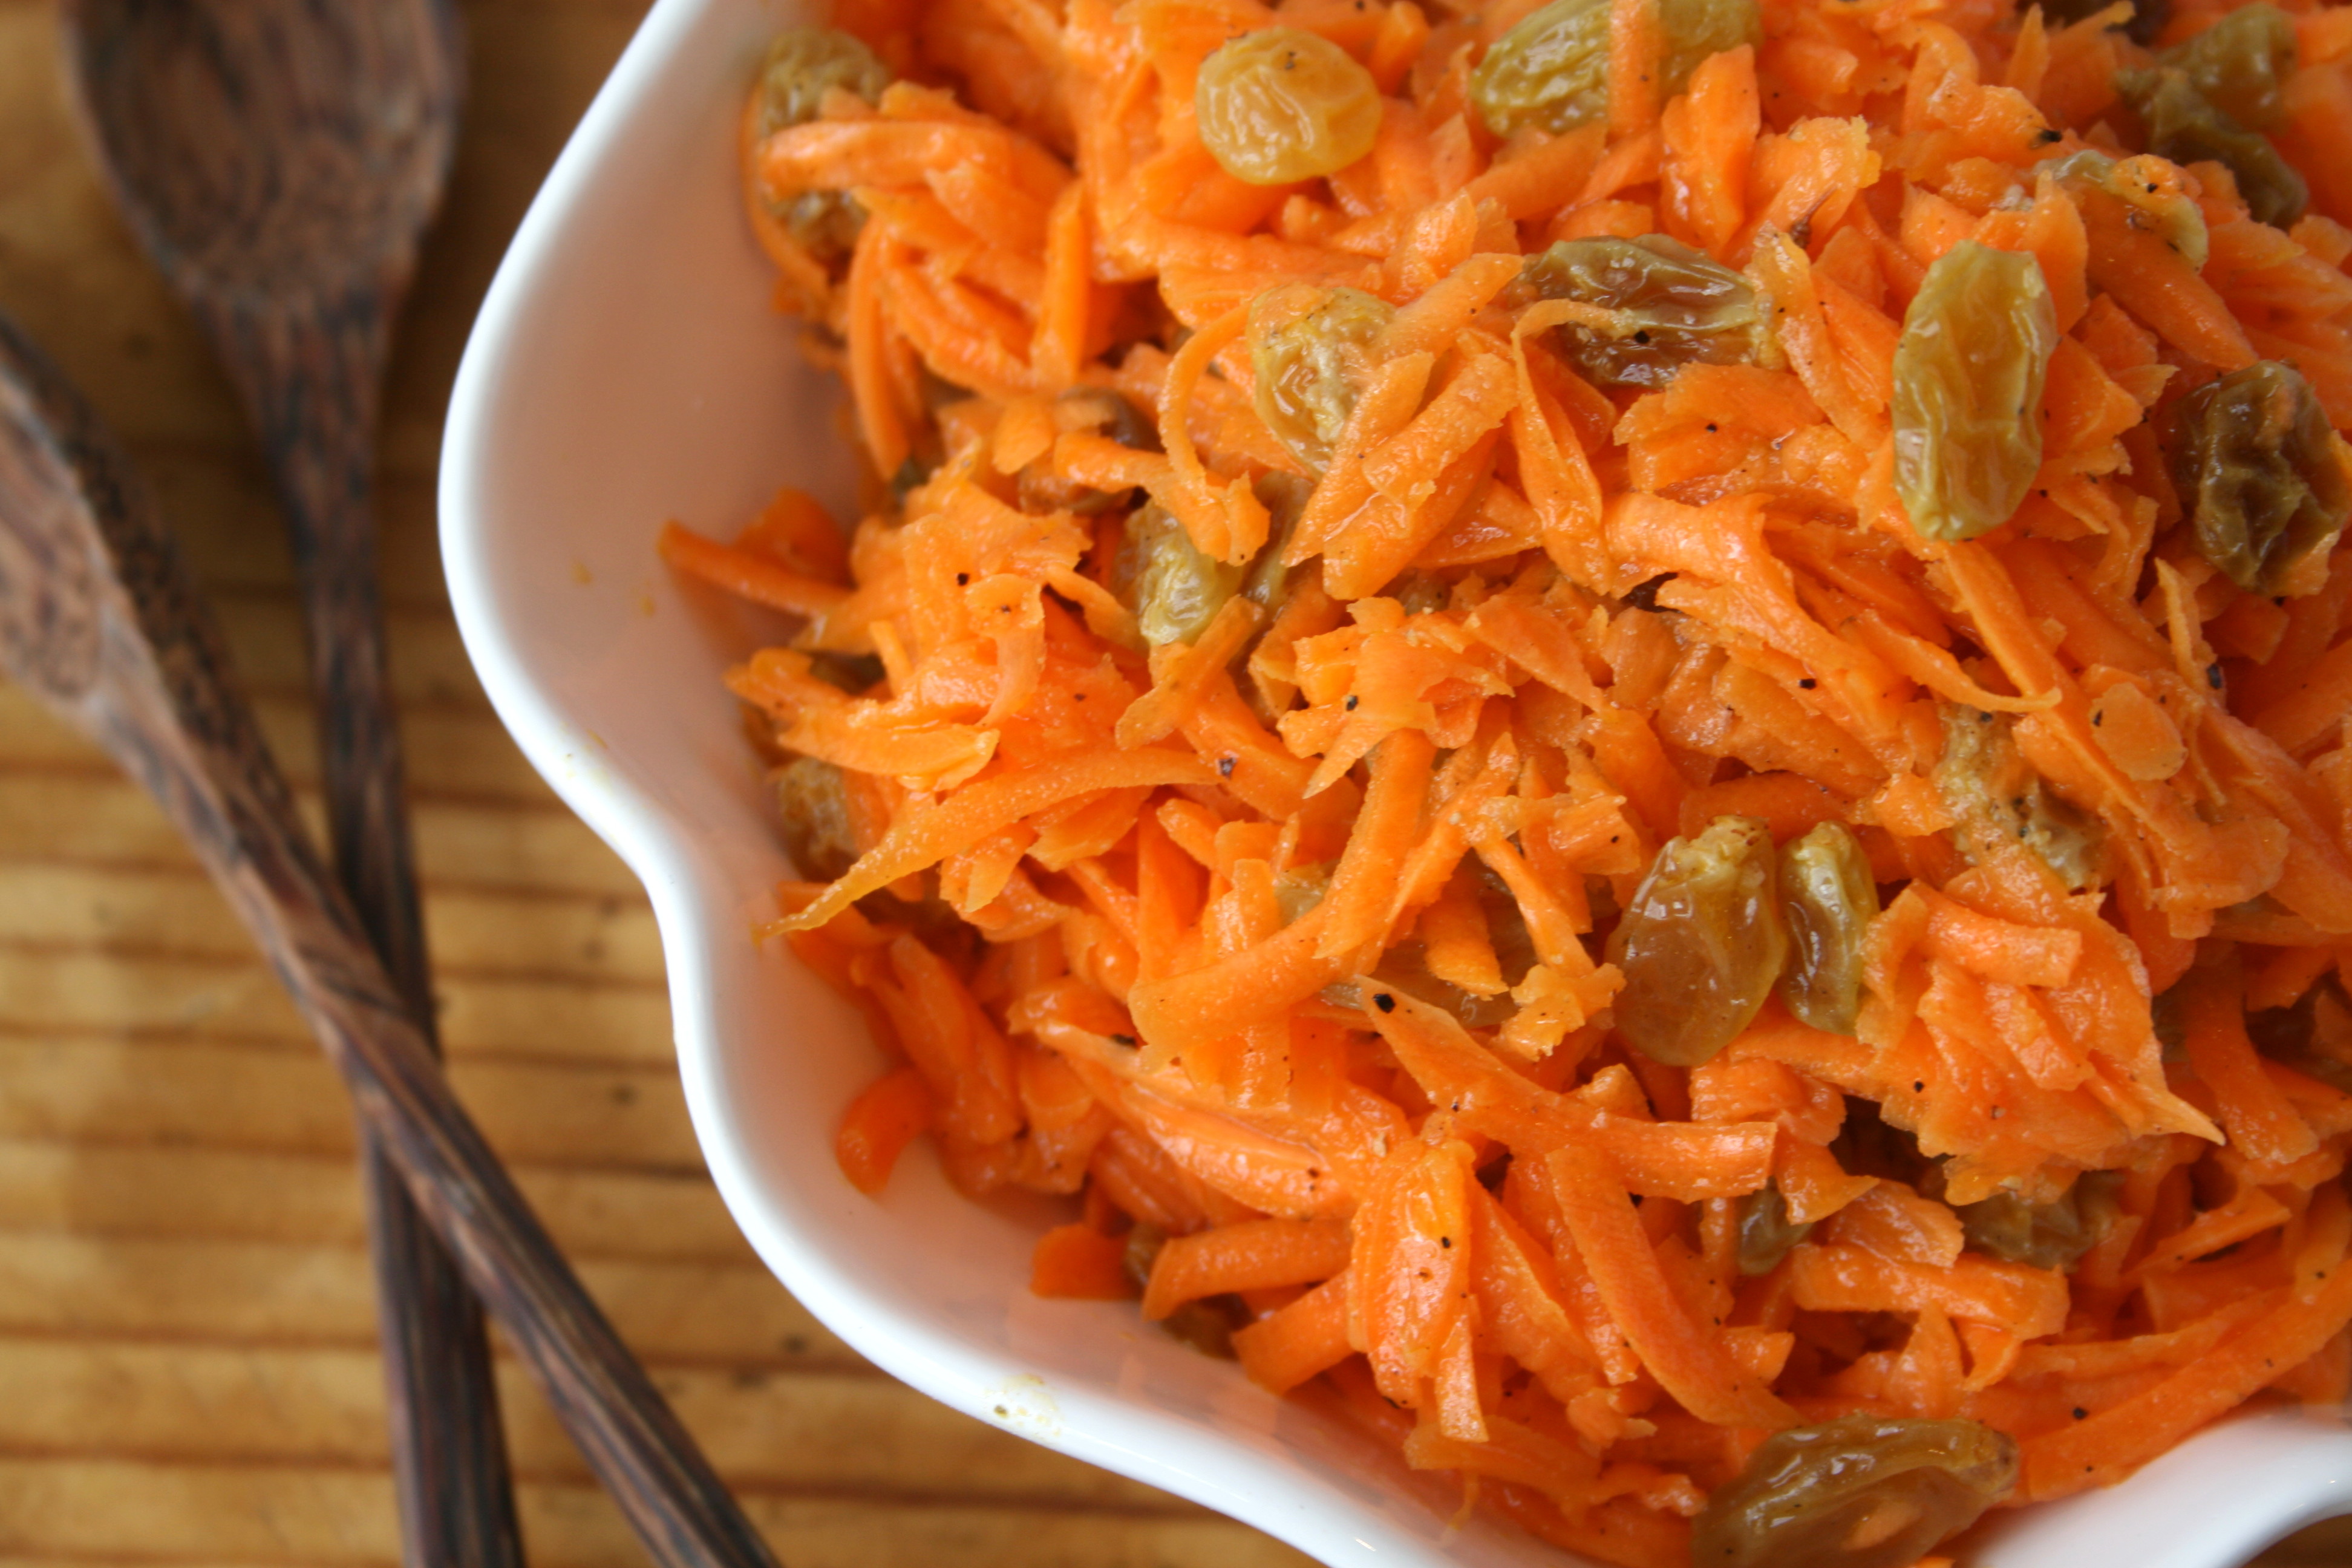 Bright orange carrot and raisin salad in a white bowl with wooden spoons along the left side